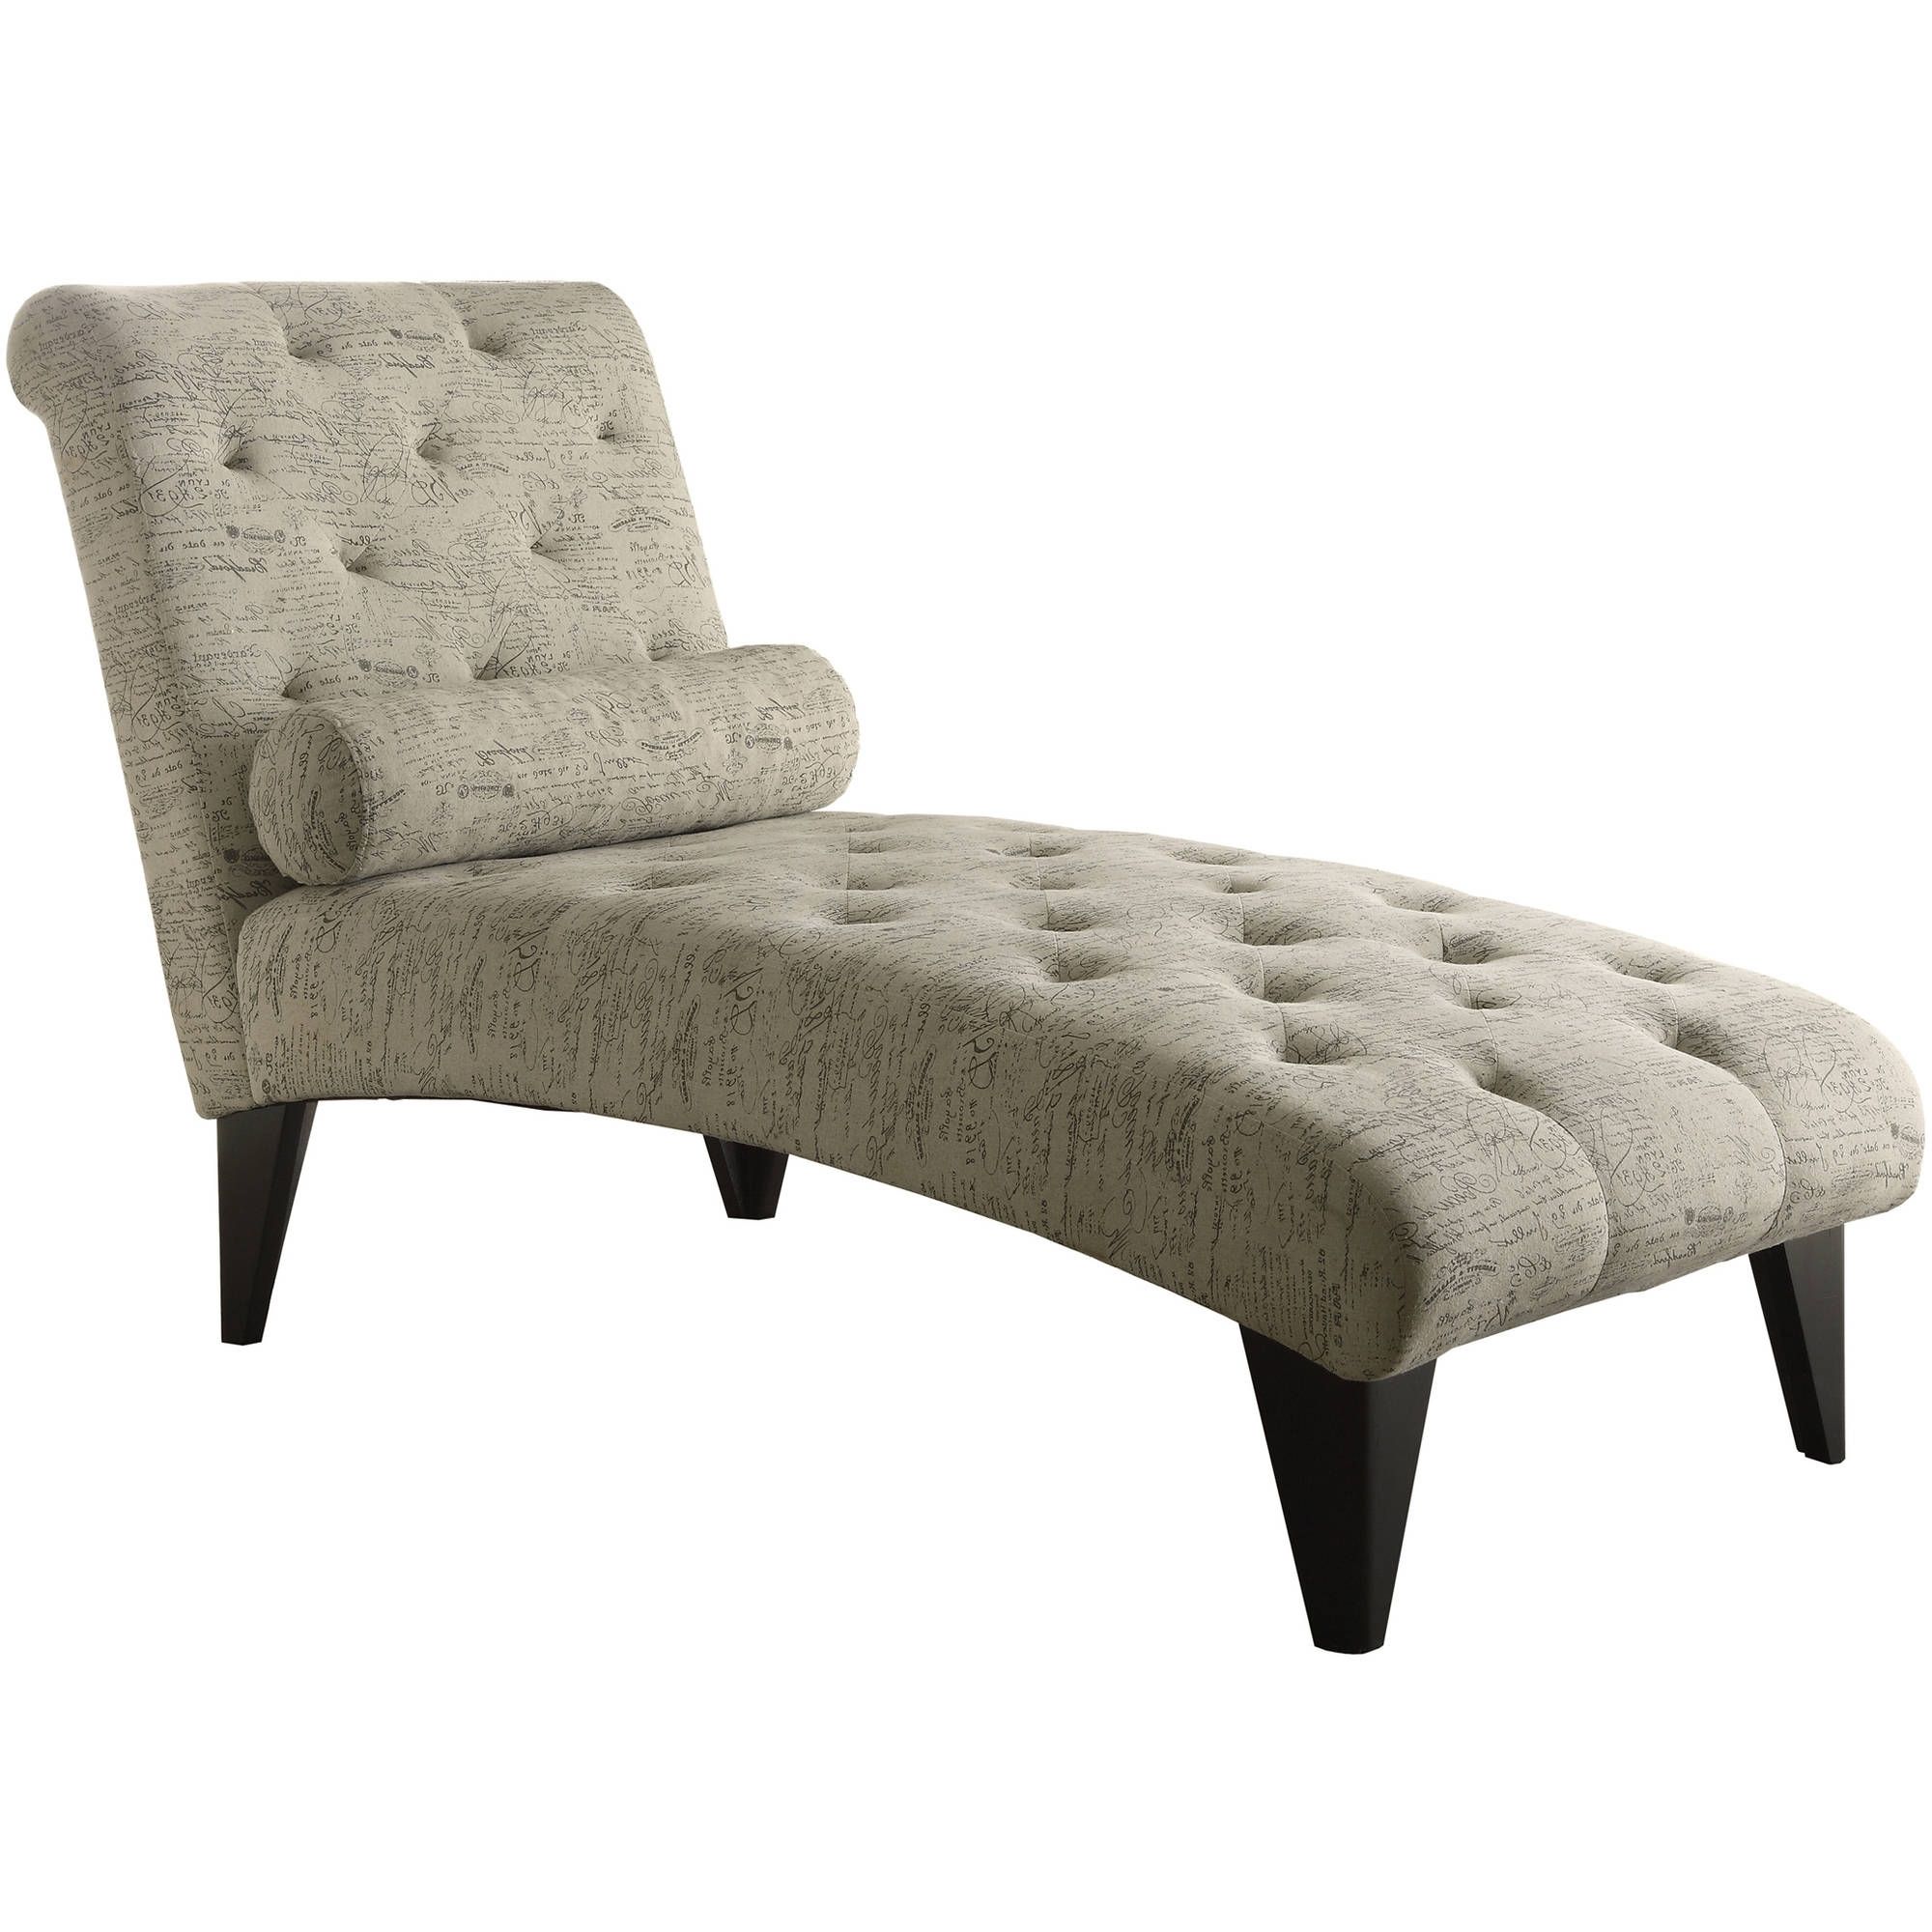 Famous Chaise Lounges – Walmart Regarding Chaise Lounge Chairs For Bedroom (View 15 of 15)